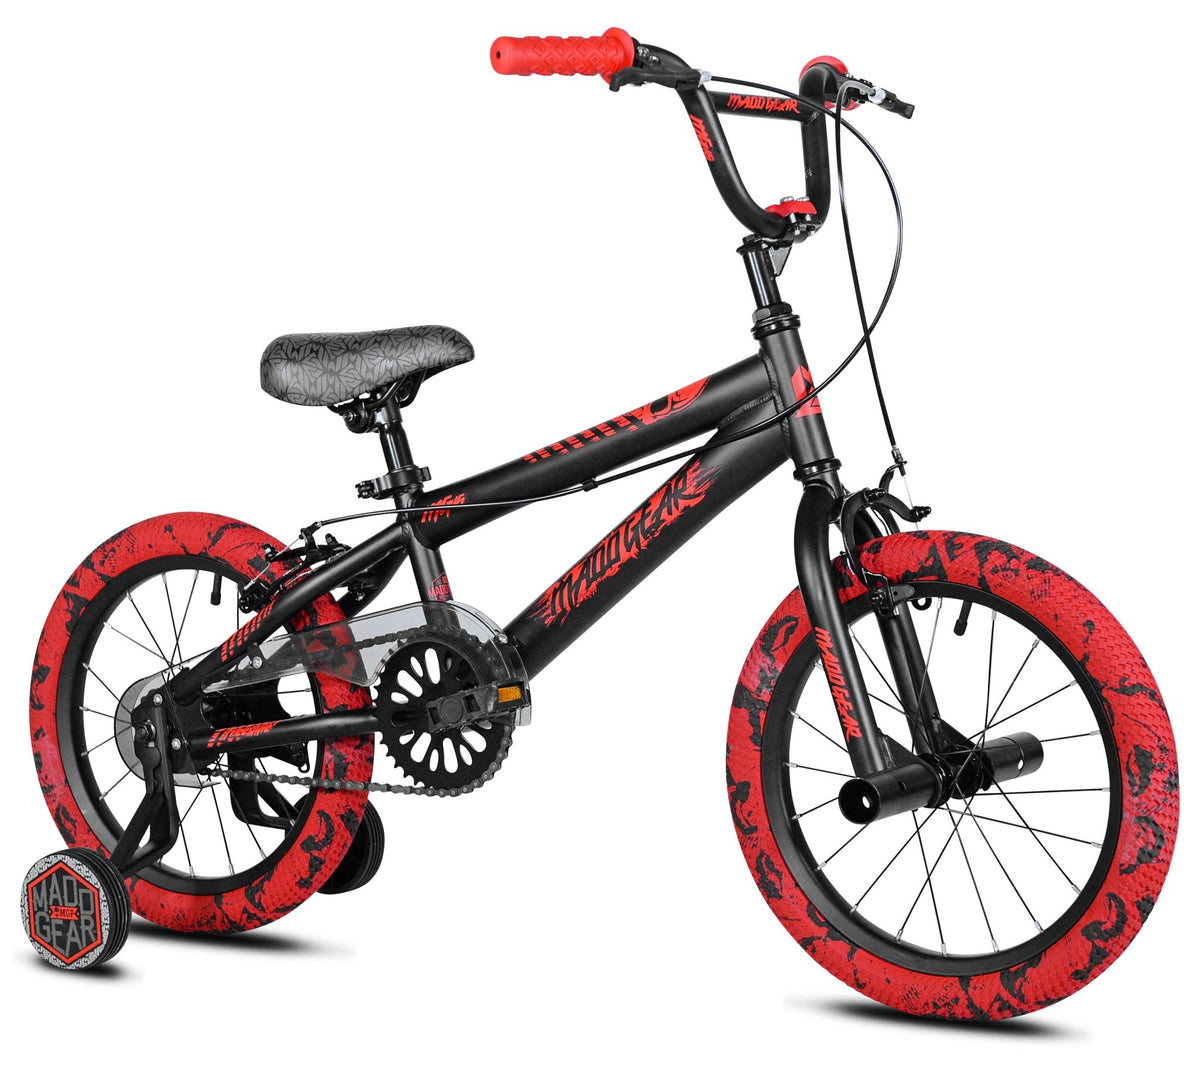 16" Madd Gear® MG16 | Bike for Kids Ages 4-6